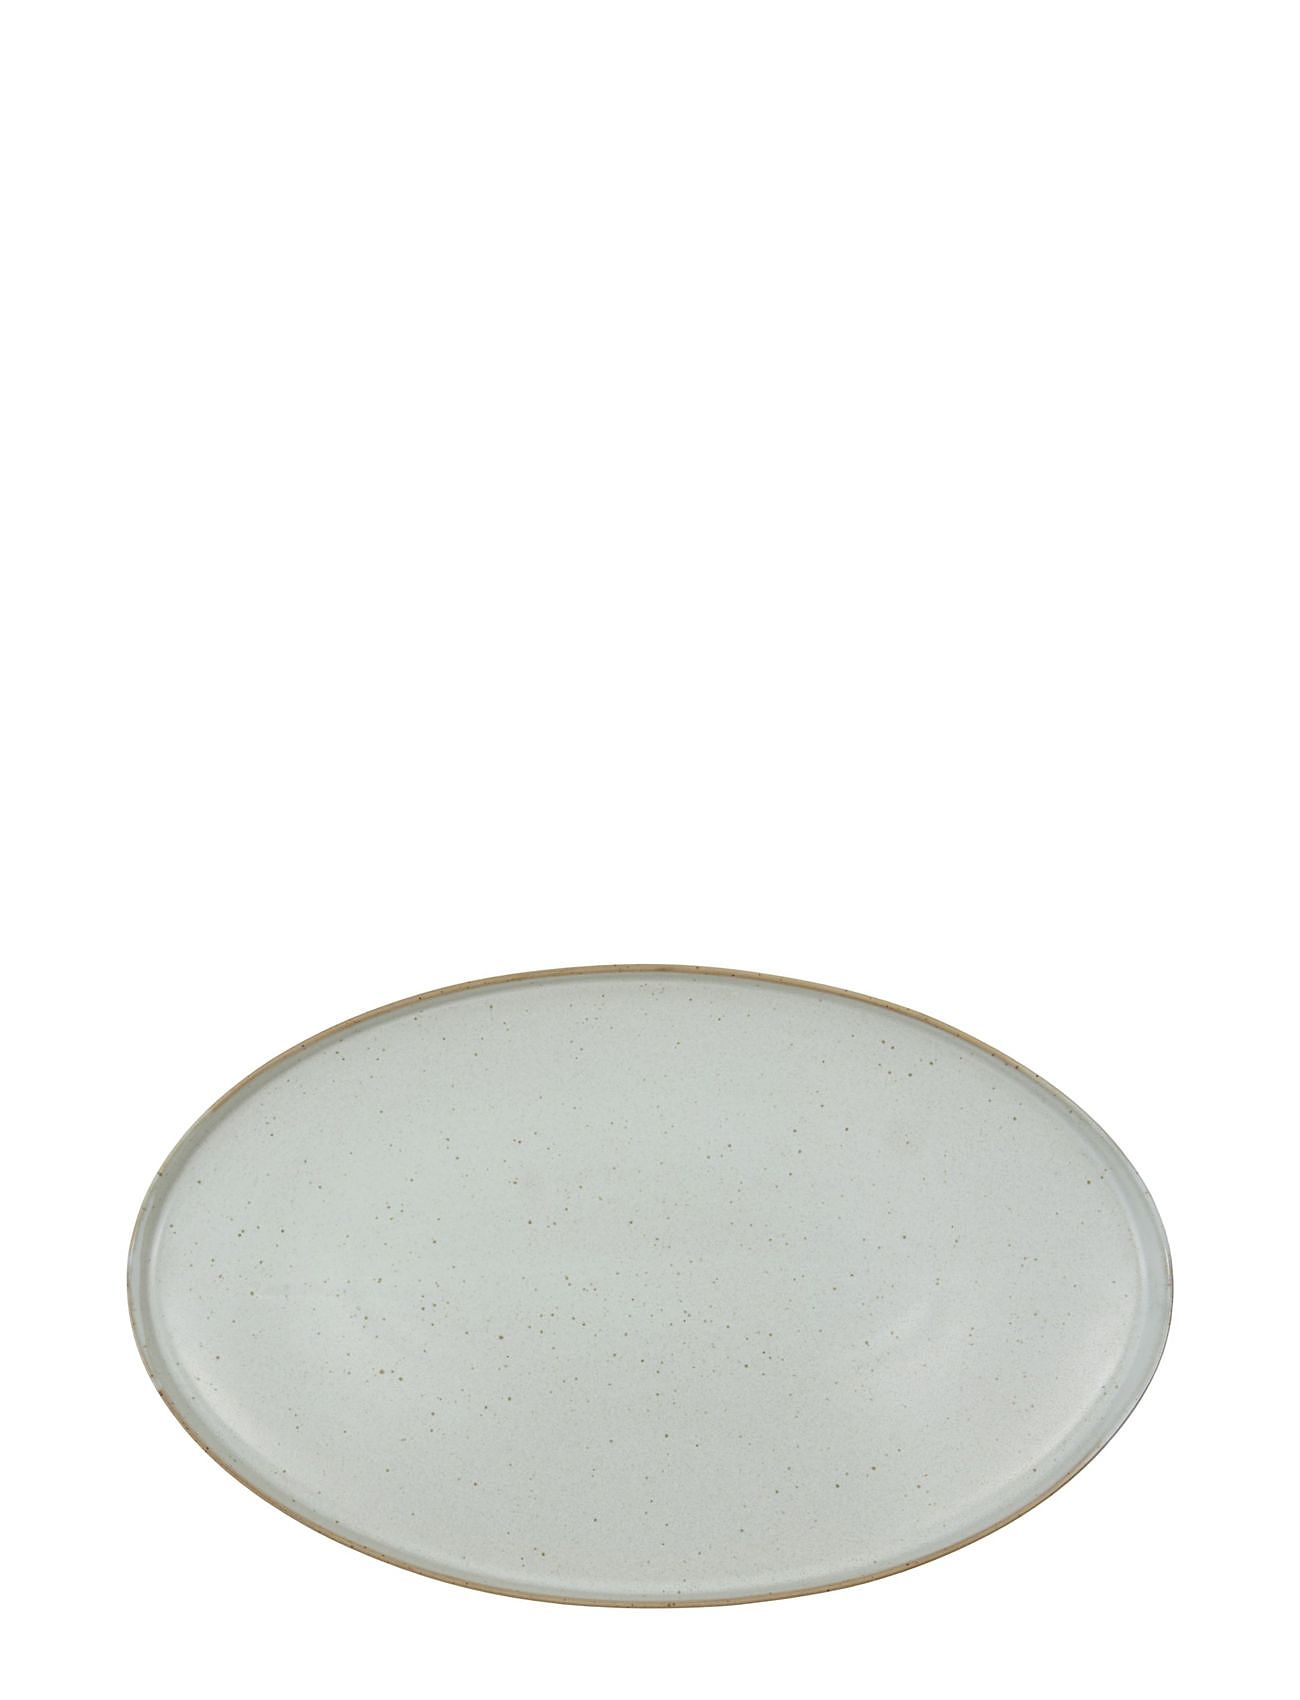 Serving Dish, Pion, Grey/White Home Tableware Serving Dishes Serving Platters Grey House Doctor